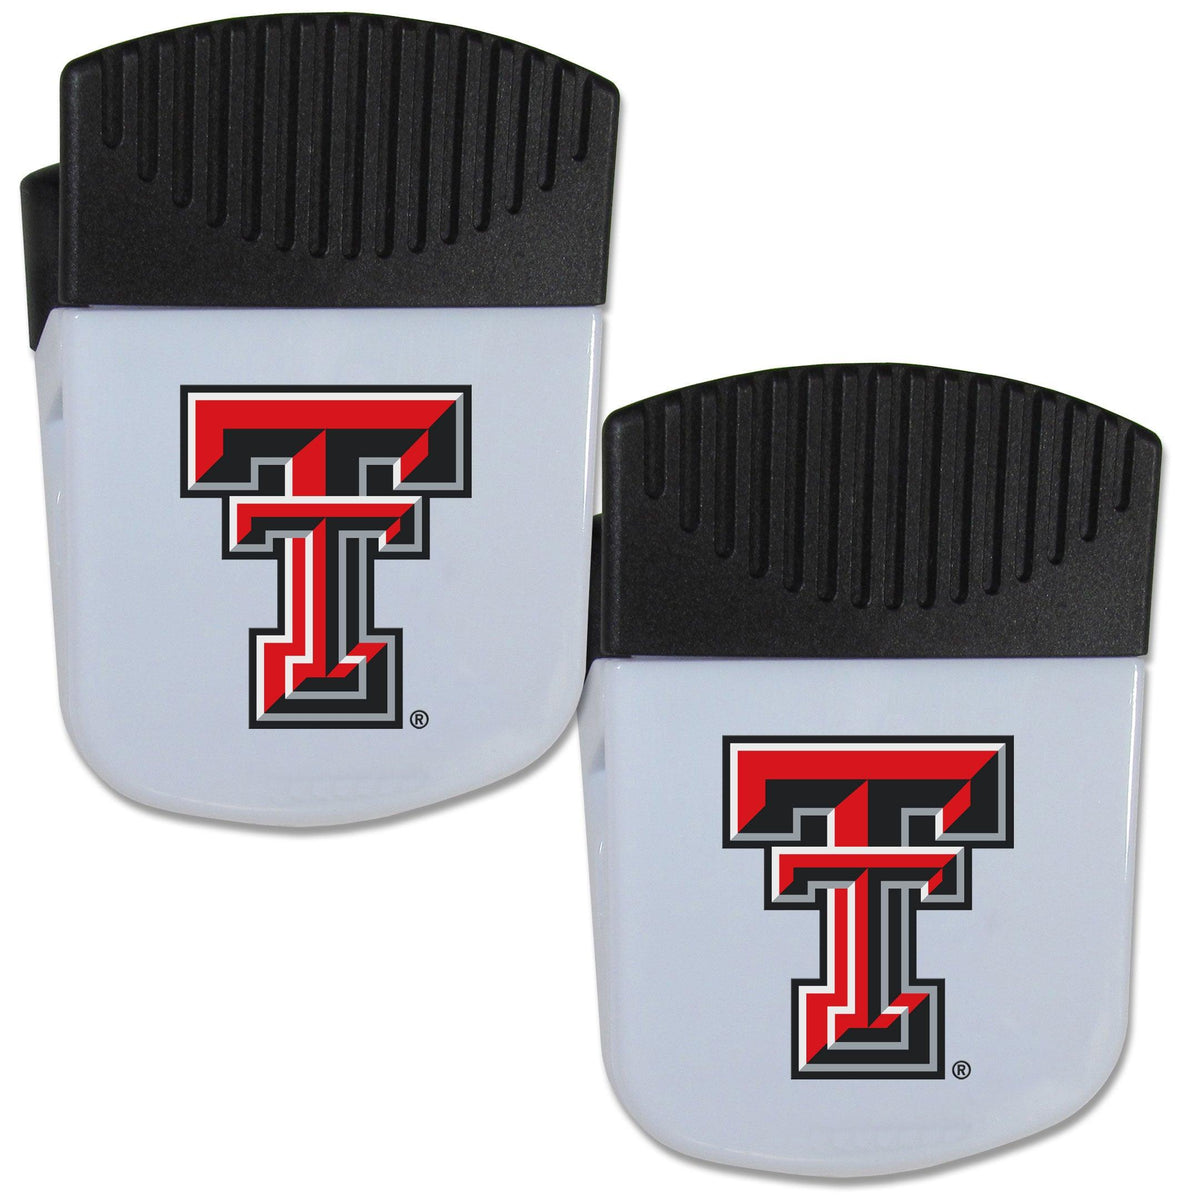 Texas Tech Raiders Chip Clip Magnet with Bottle Opener, 2 pack - Flyclothing LLC